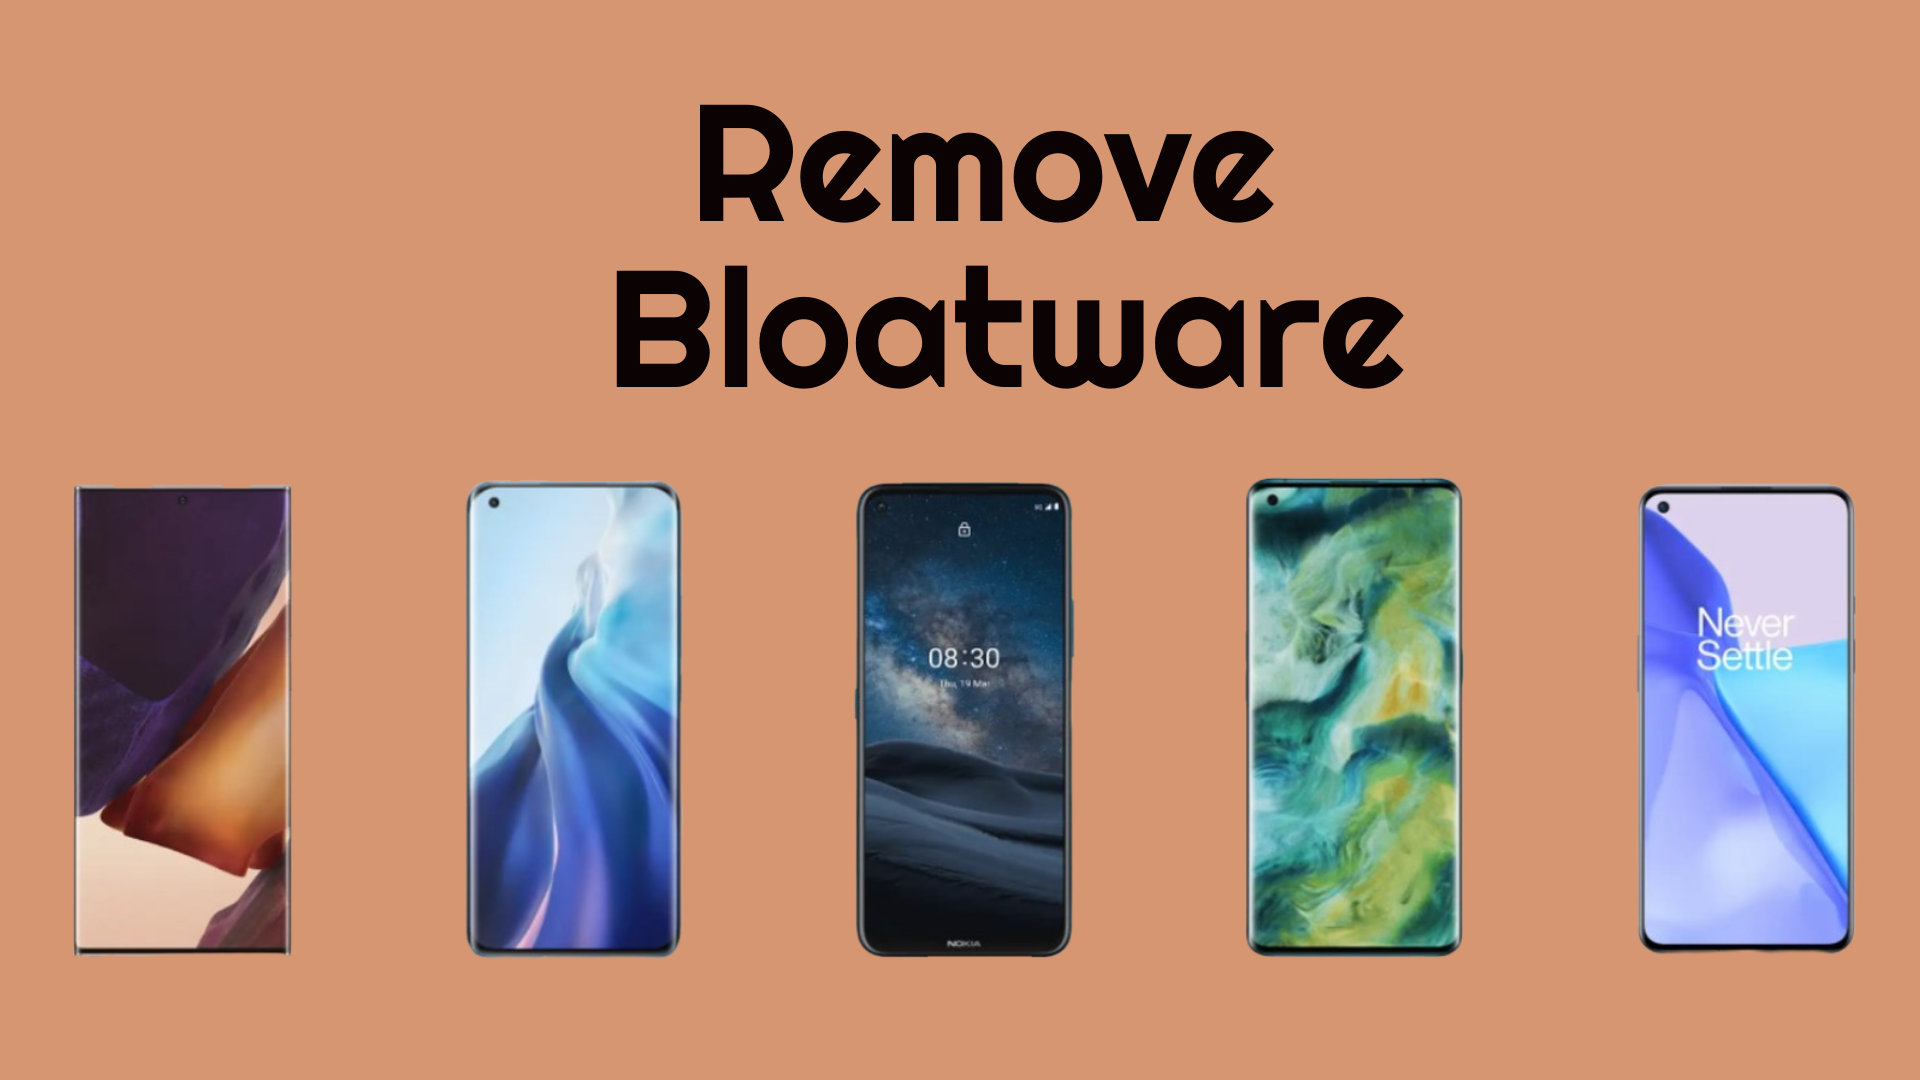 Bloatware Remover - How to Uninstall System Apps From Any Android easily